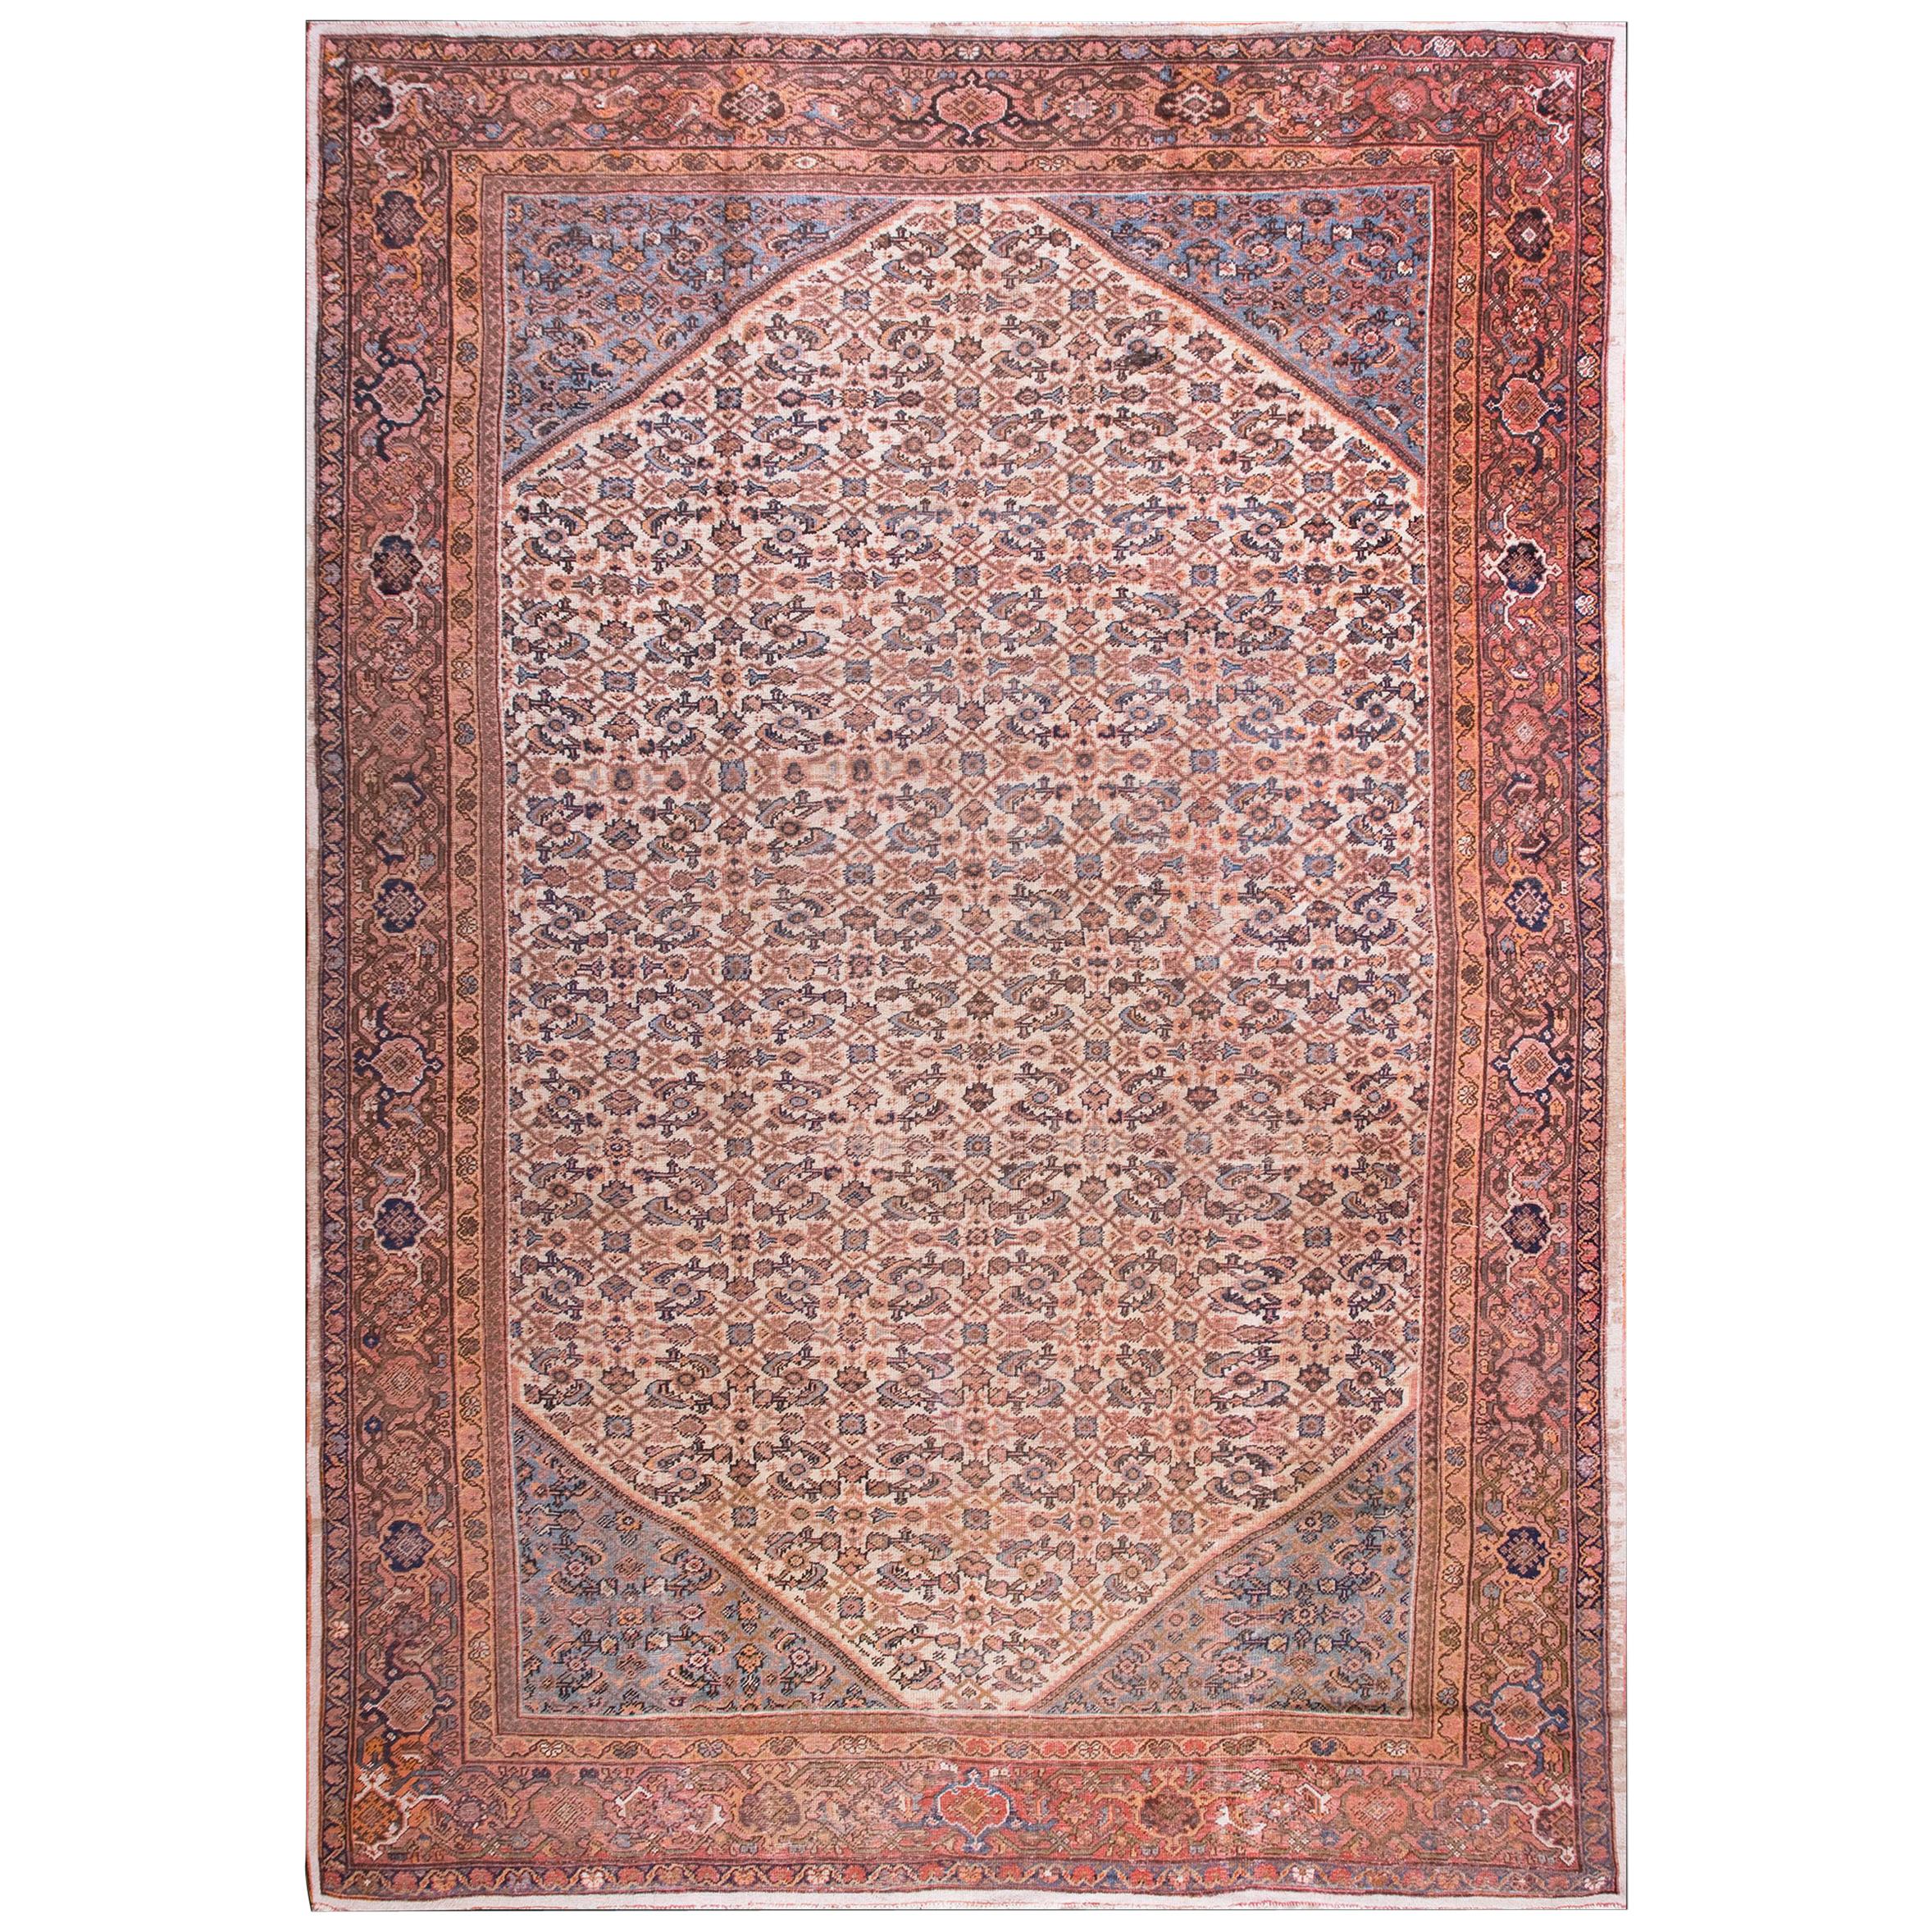 Early 20th Century Persian Mahal Carpet ( 11'10" x 16' - 360 x 488 ) For Sale